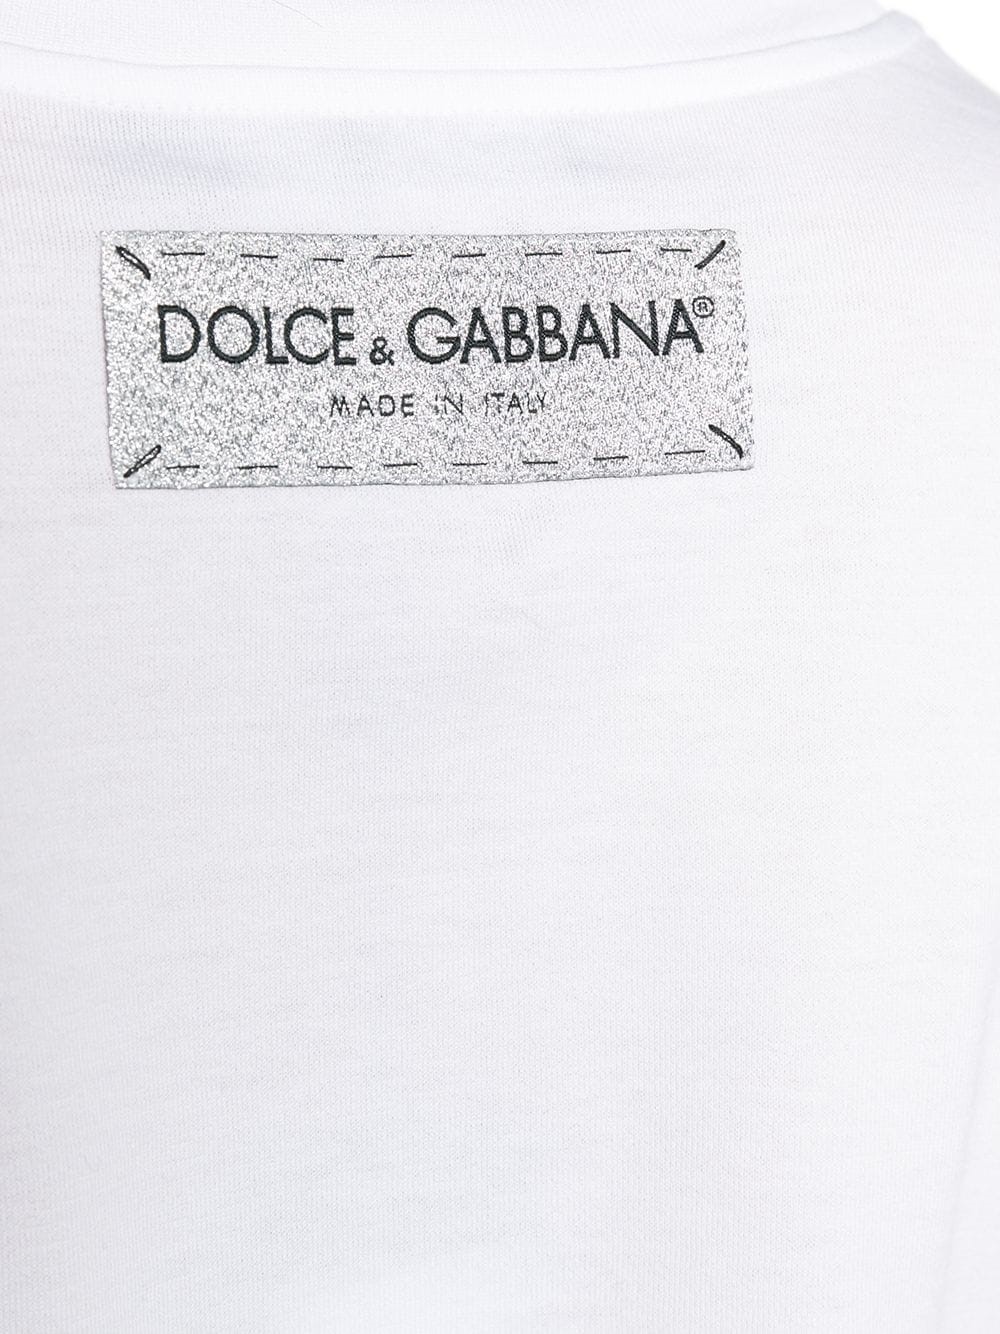 dolce & gabbana PRINTED T-SHIRT available on montiboutique.com - 23538